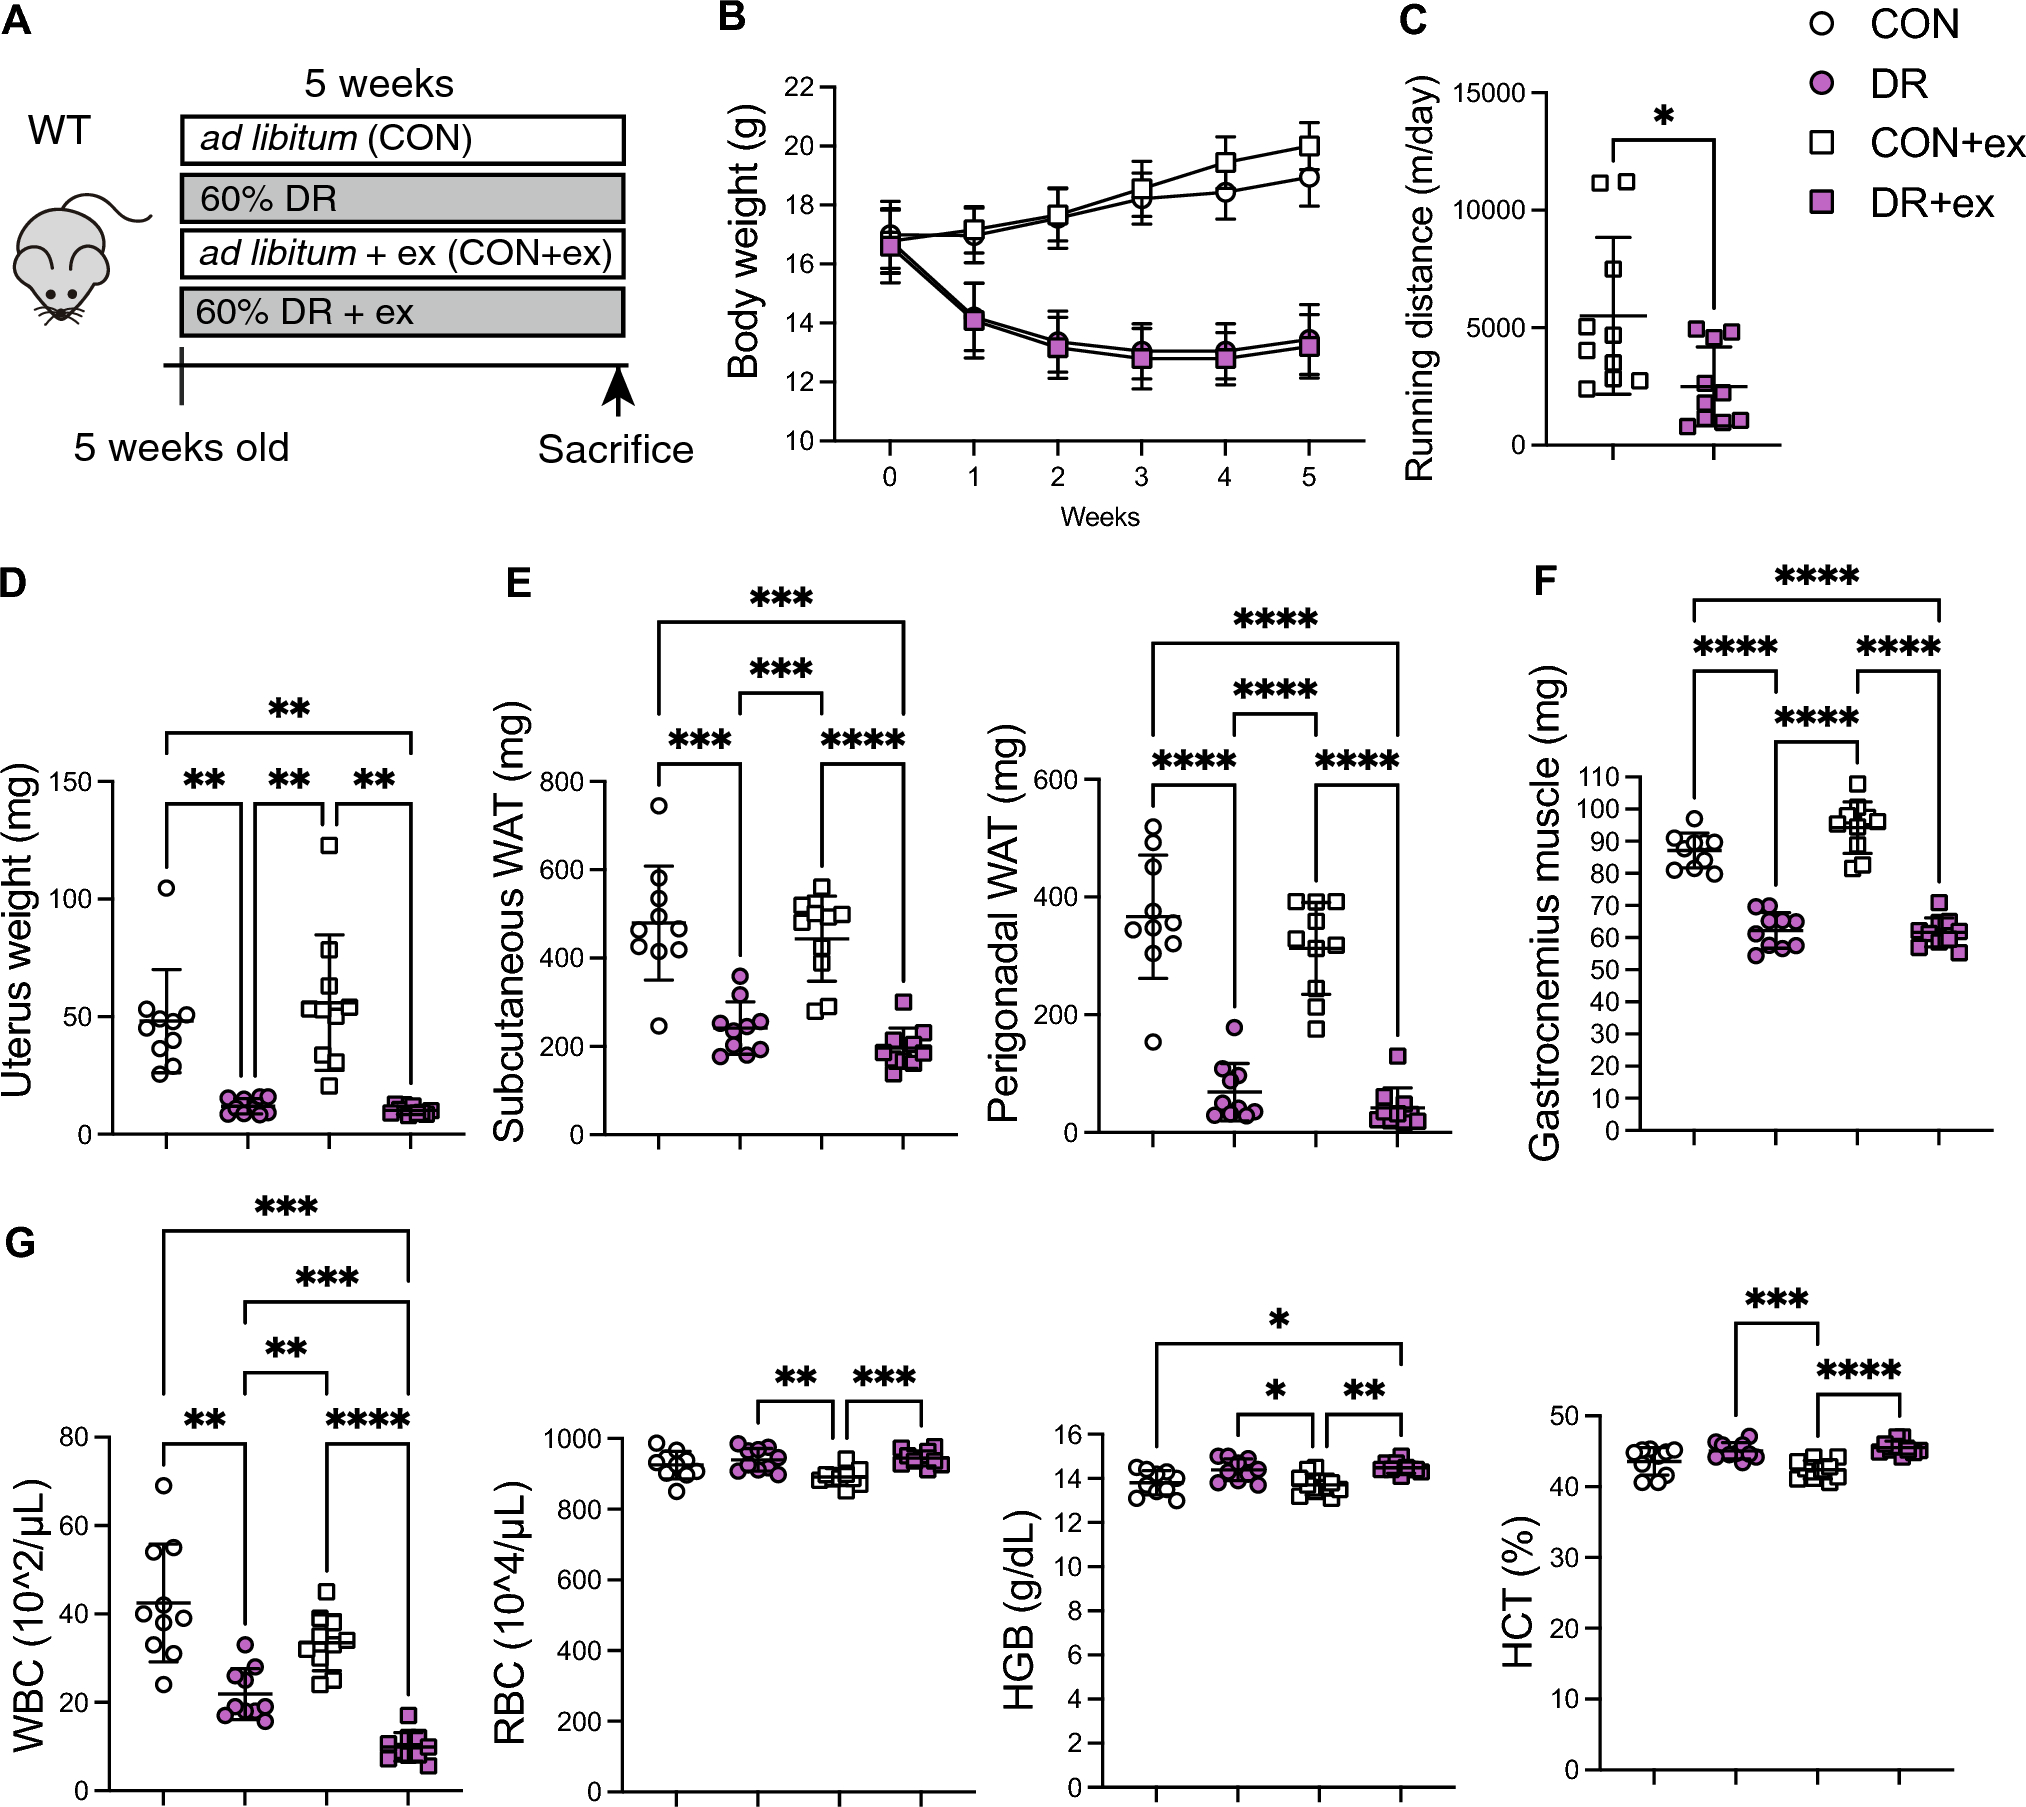 Dietary restriction plus exercise change gene expression of Cxcl12 abundant reticular cells in female mice